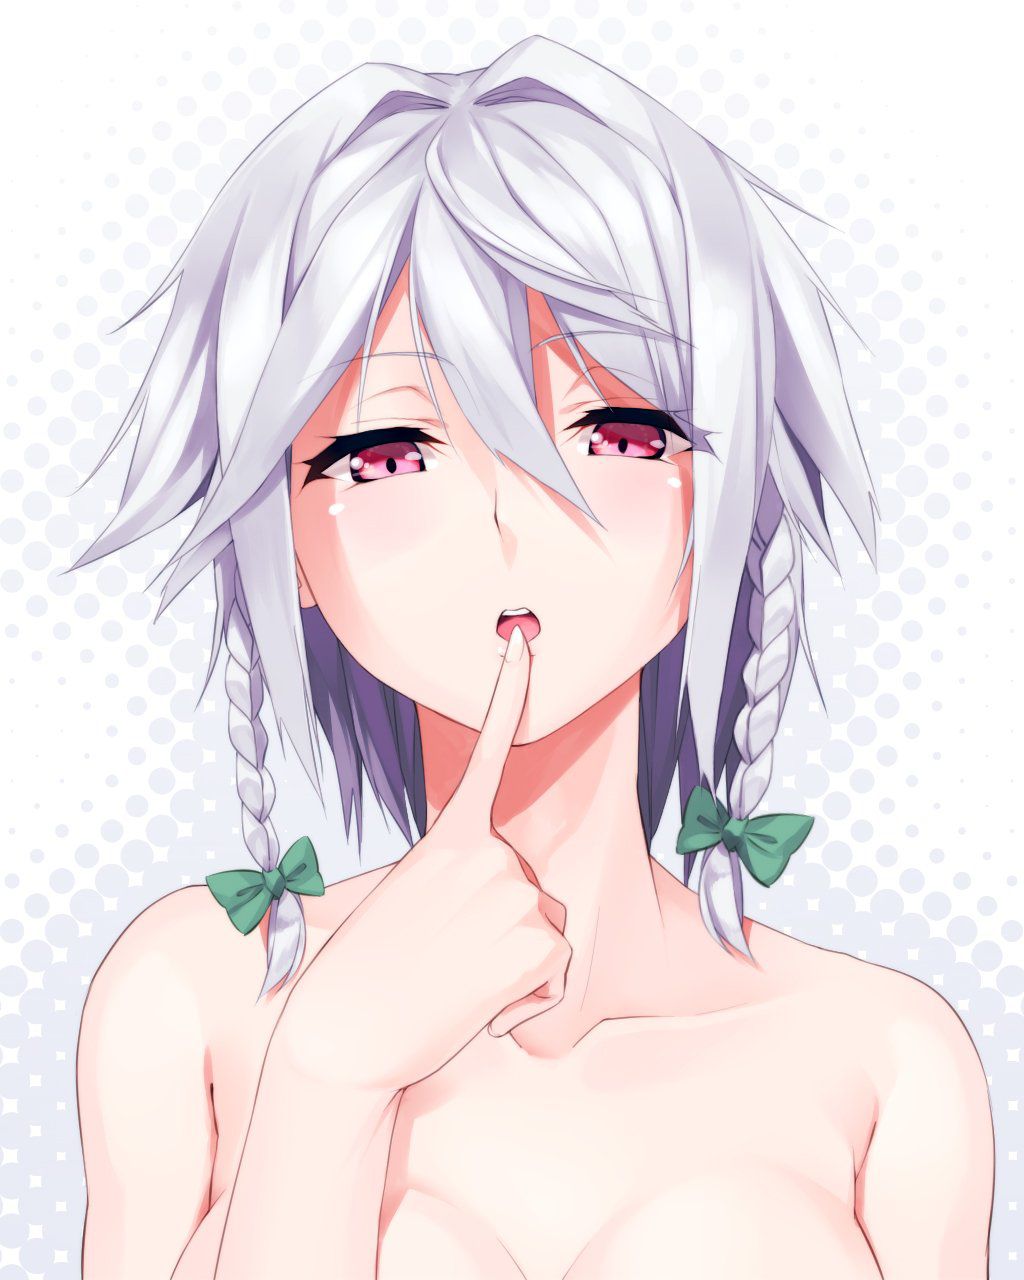 [2nd edition] Beautiful silver hair girl secondary erotic image Part 11 [Silver hair] 4